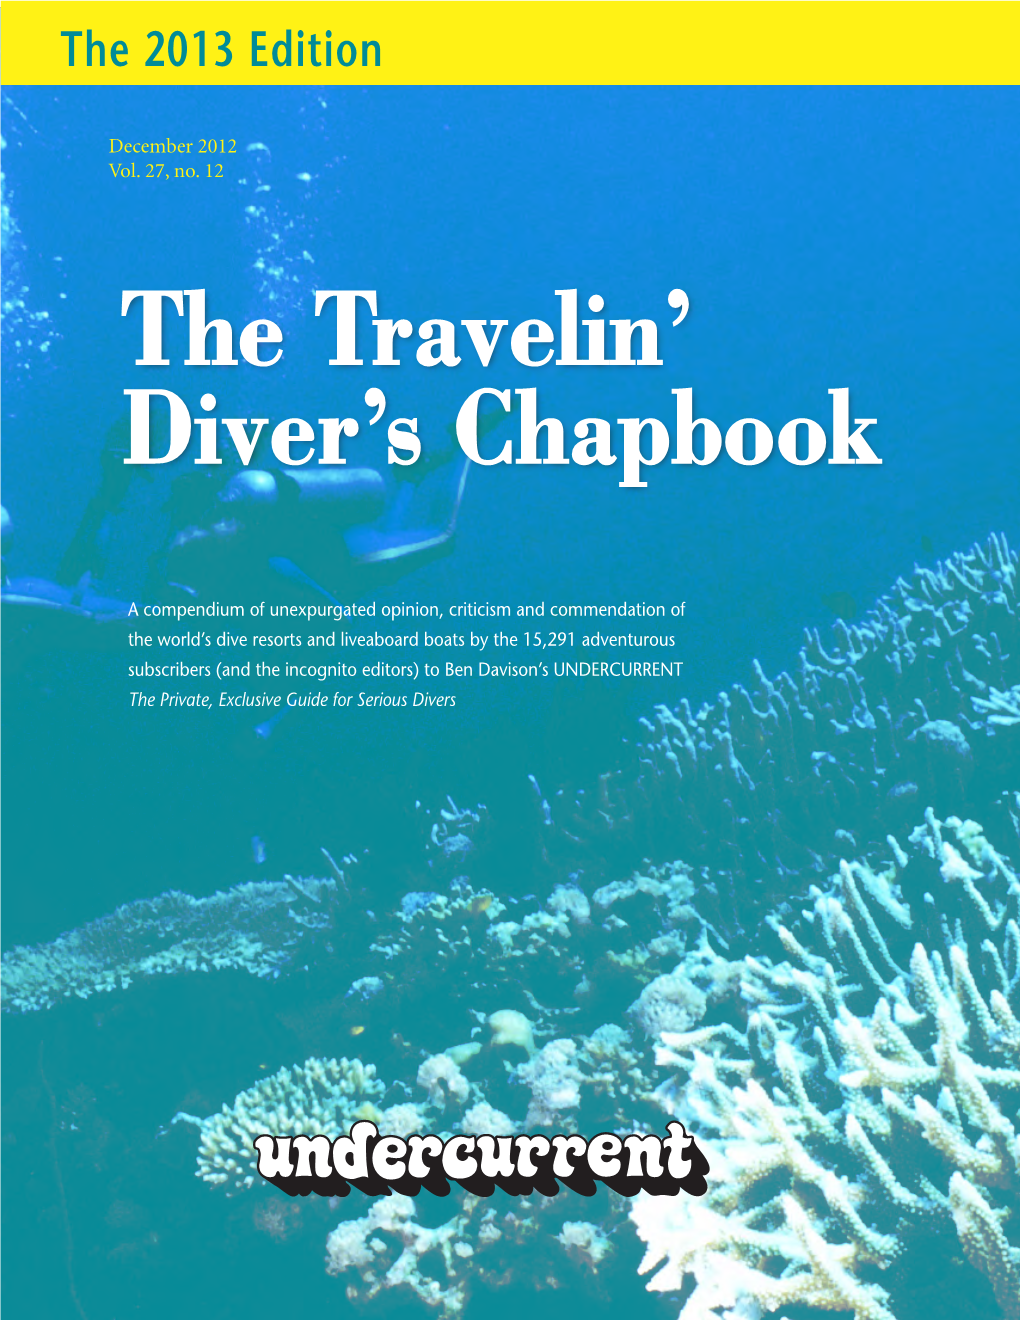 The 2013 Travelin' Diver's Chapbook